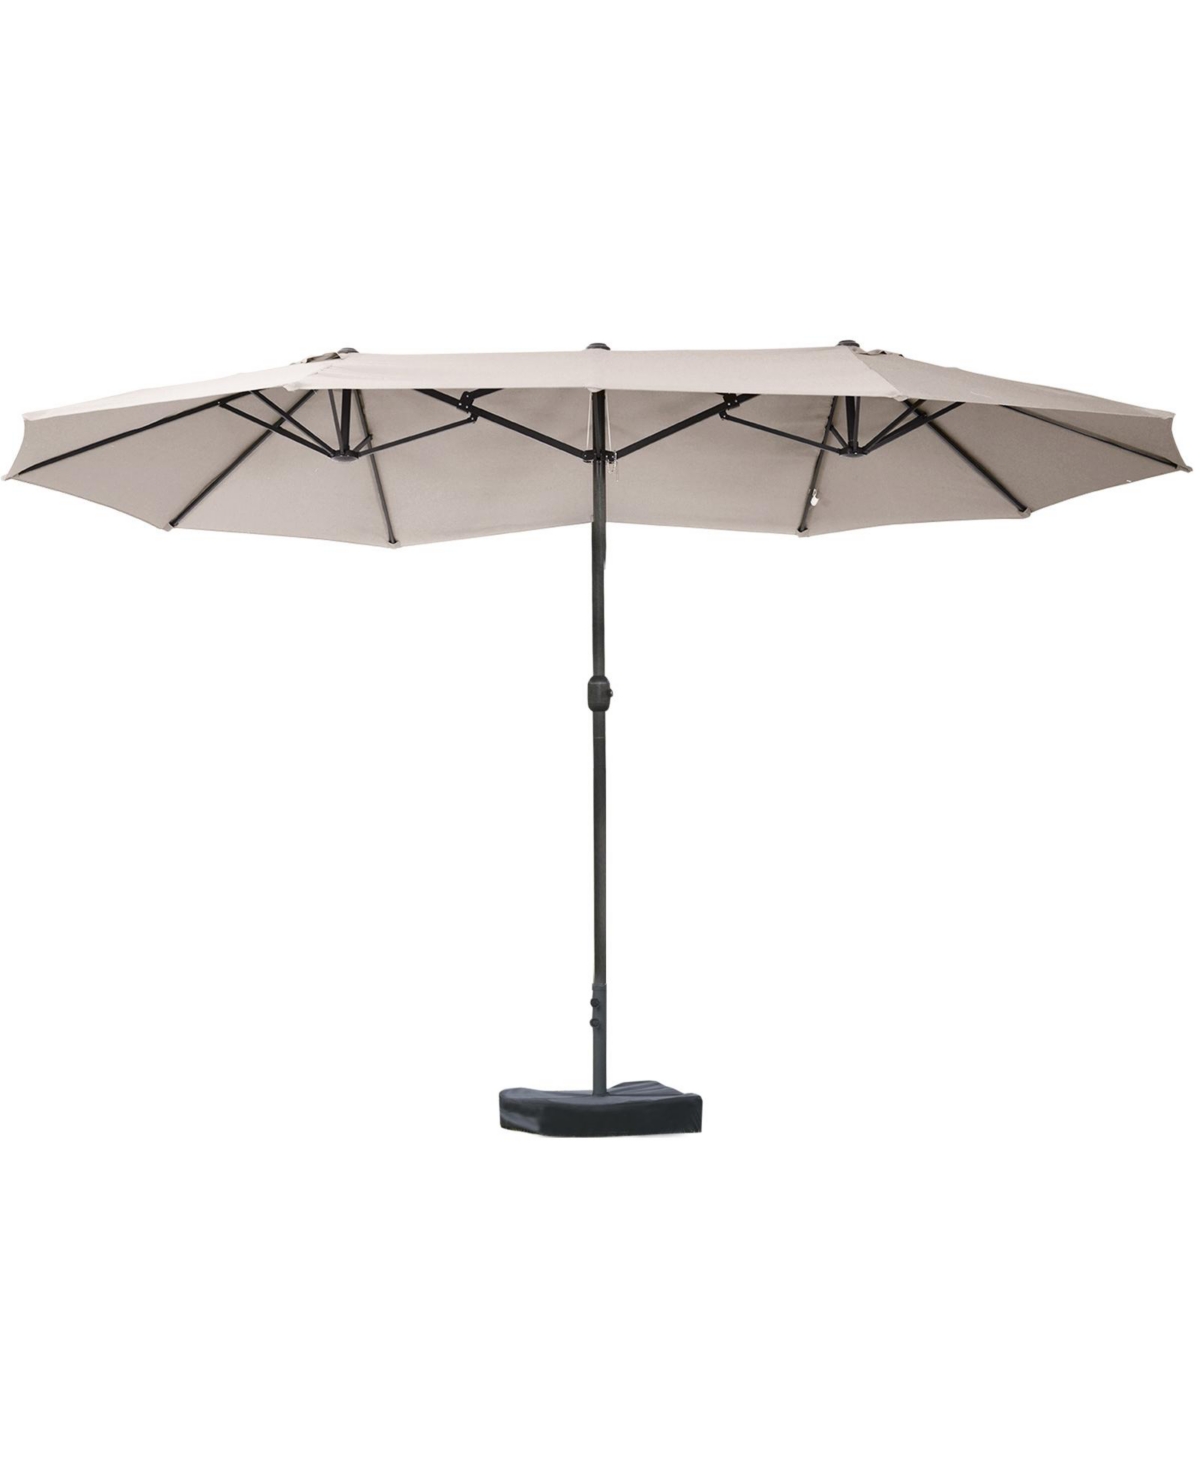 Patio Umbrella 15' Steel Rectangular Outdoor Double Sided Market with base, Uv Sun Protection & Easy Crank for Deck Pool Patio, Brown - Brown